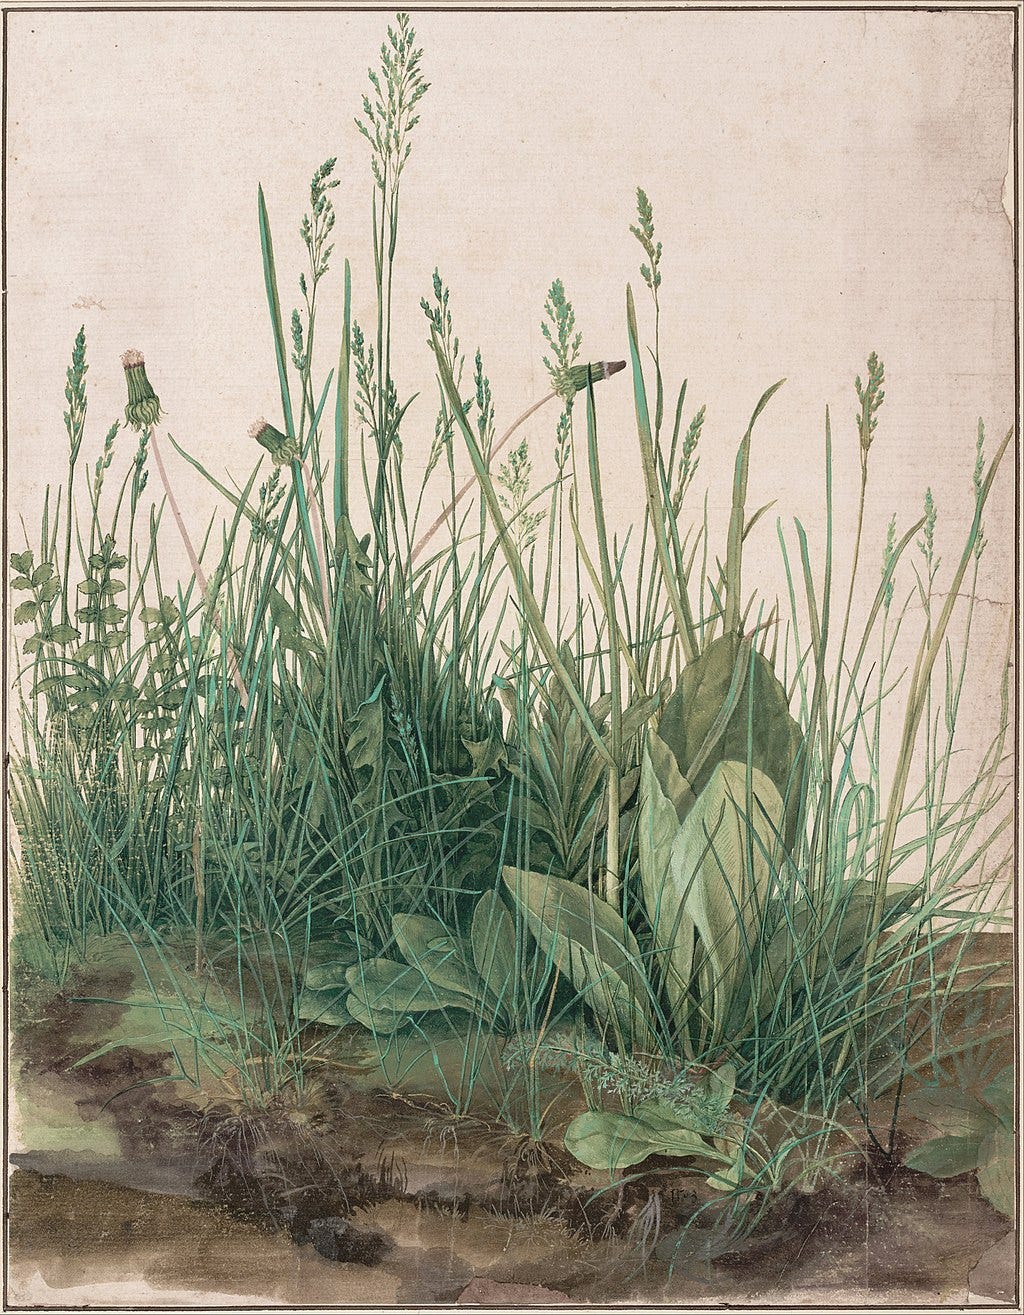 From the Wikipedia article on this image: "The watercolour shows a large piece of turf and little else. The various plants can be identified as cock's-foot, creeping bent, smooth meadow-grass, daisy, dandelion, germander speedwell, greater plantain, hound's-tongue and yarrow.[5]  The painting shows a great level of realism in its portrayal of natural objects.[6] Some of the roots have been stripped of earth to be displayed clearly to the spectator. The depiction of roots is something that can also be found in other of Dürer's works, such as Knight, Death, and the Devil (1513).[7] The vegetation comes to an end on the right side of the panel, while on the left it seems to continue on indefinitely. The background is left blank, and on the right can even be seen a clear line where the vegetation ends."